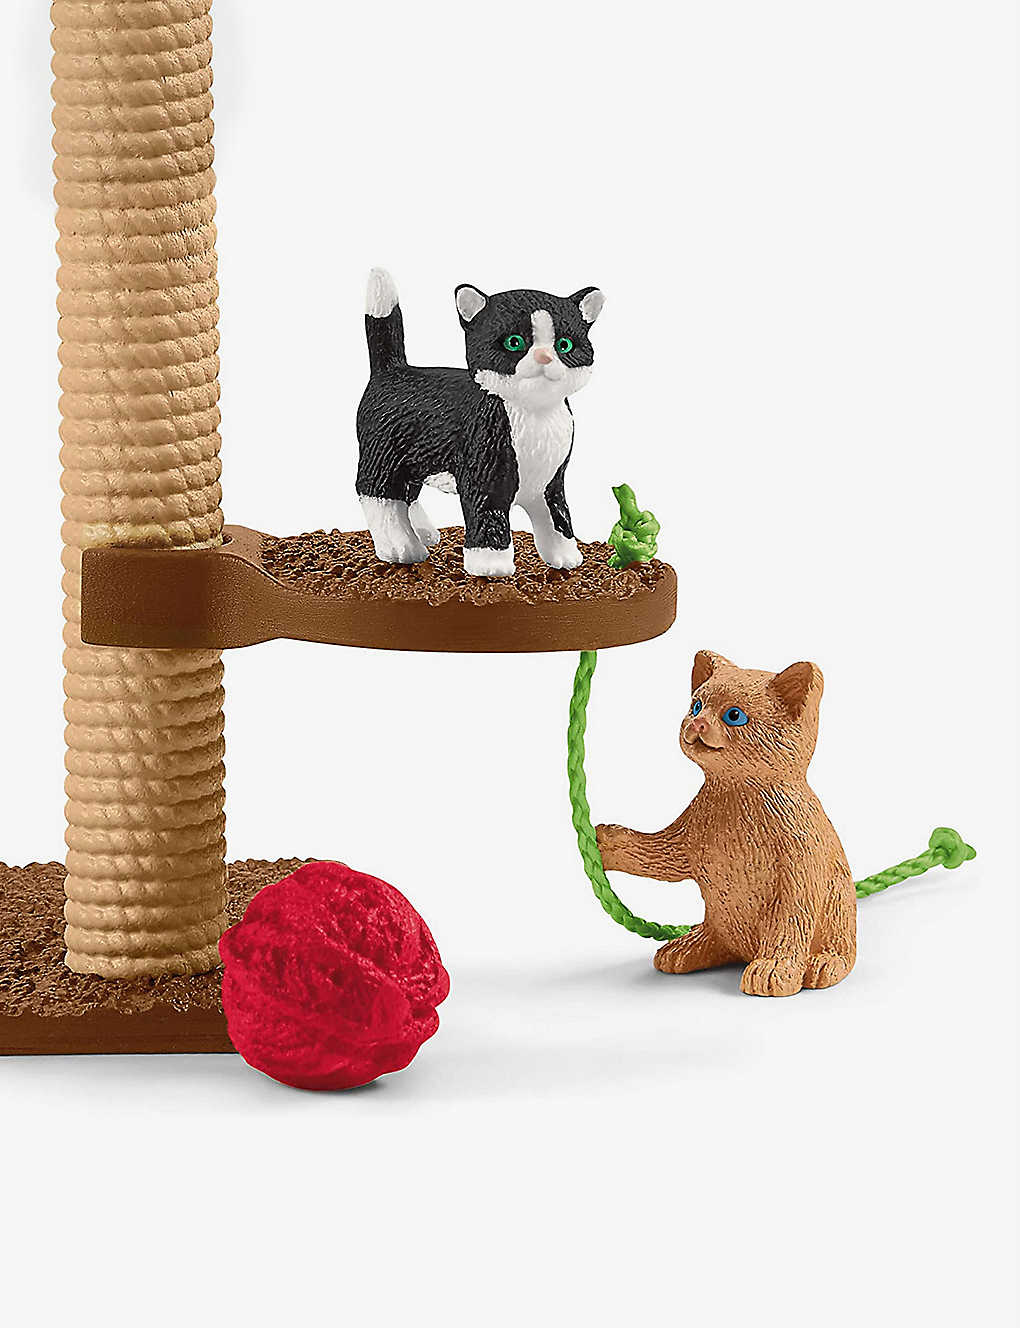 Schleich Cats & Accessories Schleich Playtime for Cute Cats Model Cats 